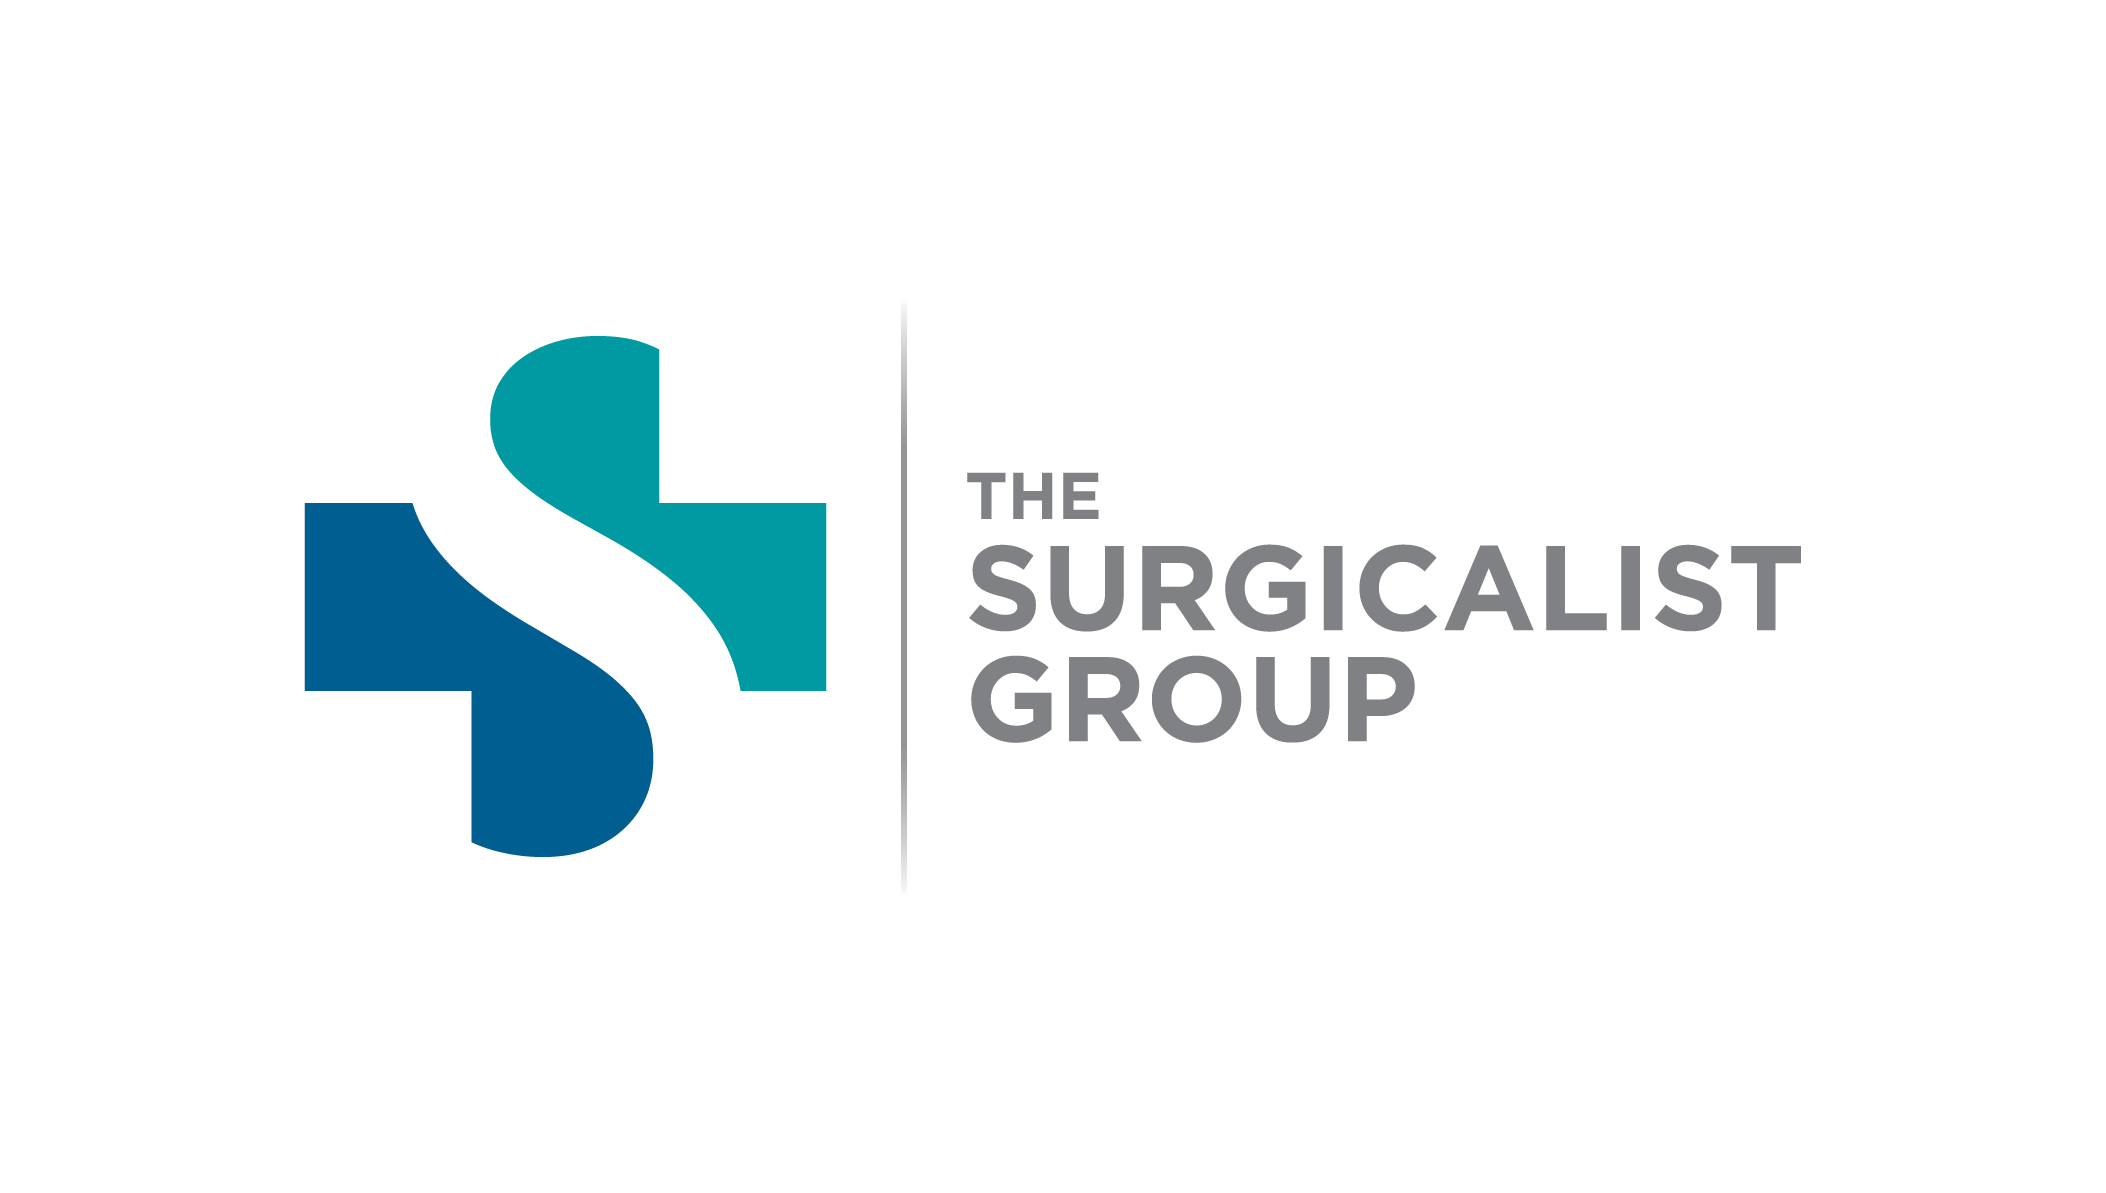 The Surgicalist Group